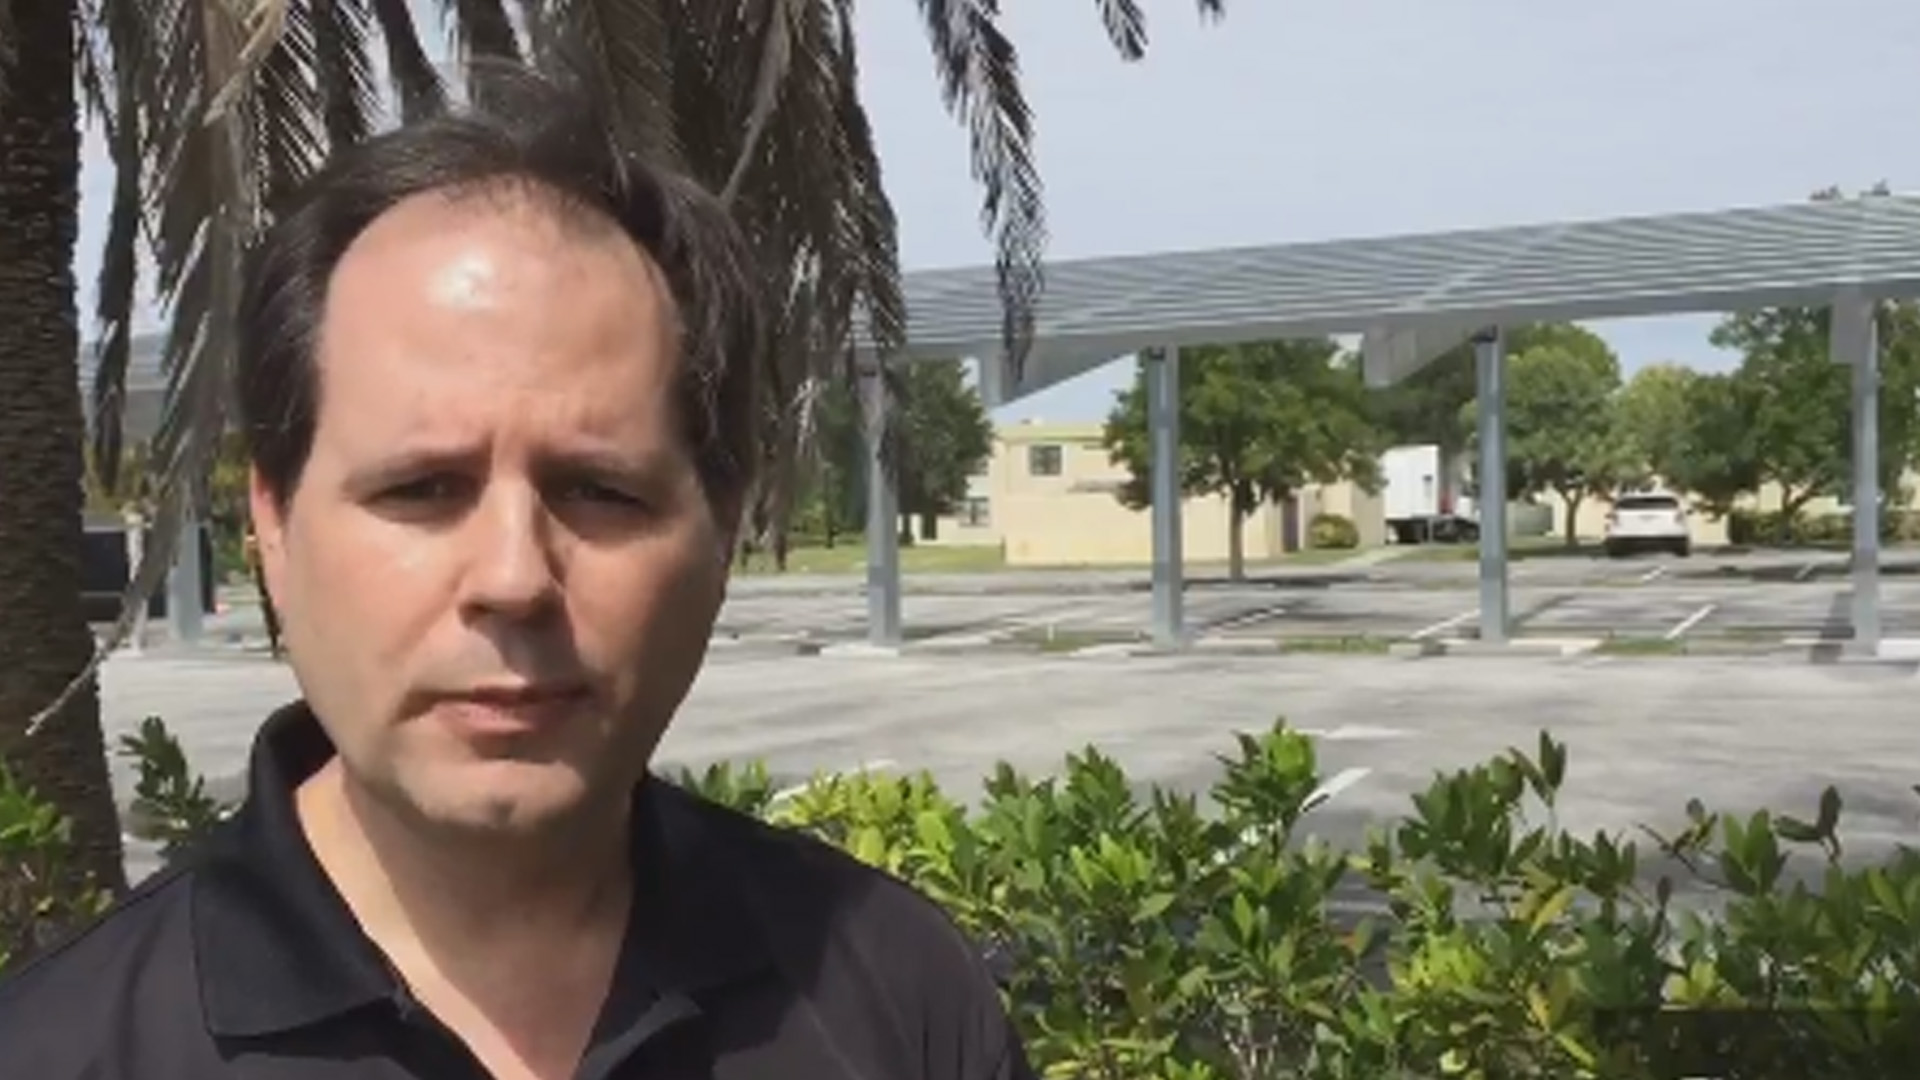 fpl-solar-canopy-built-in-wrong-spot-at-venice-community-center-wtsp